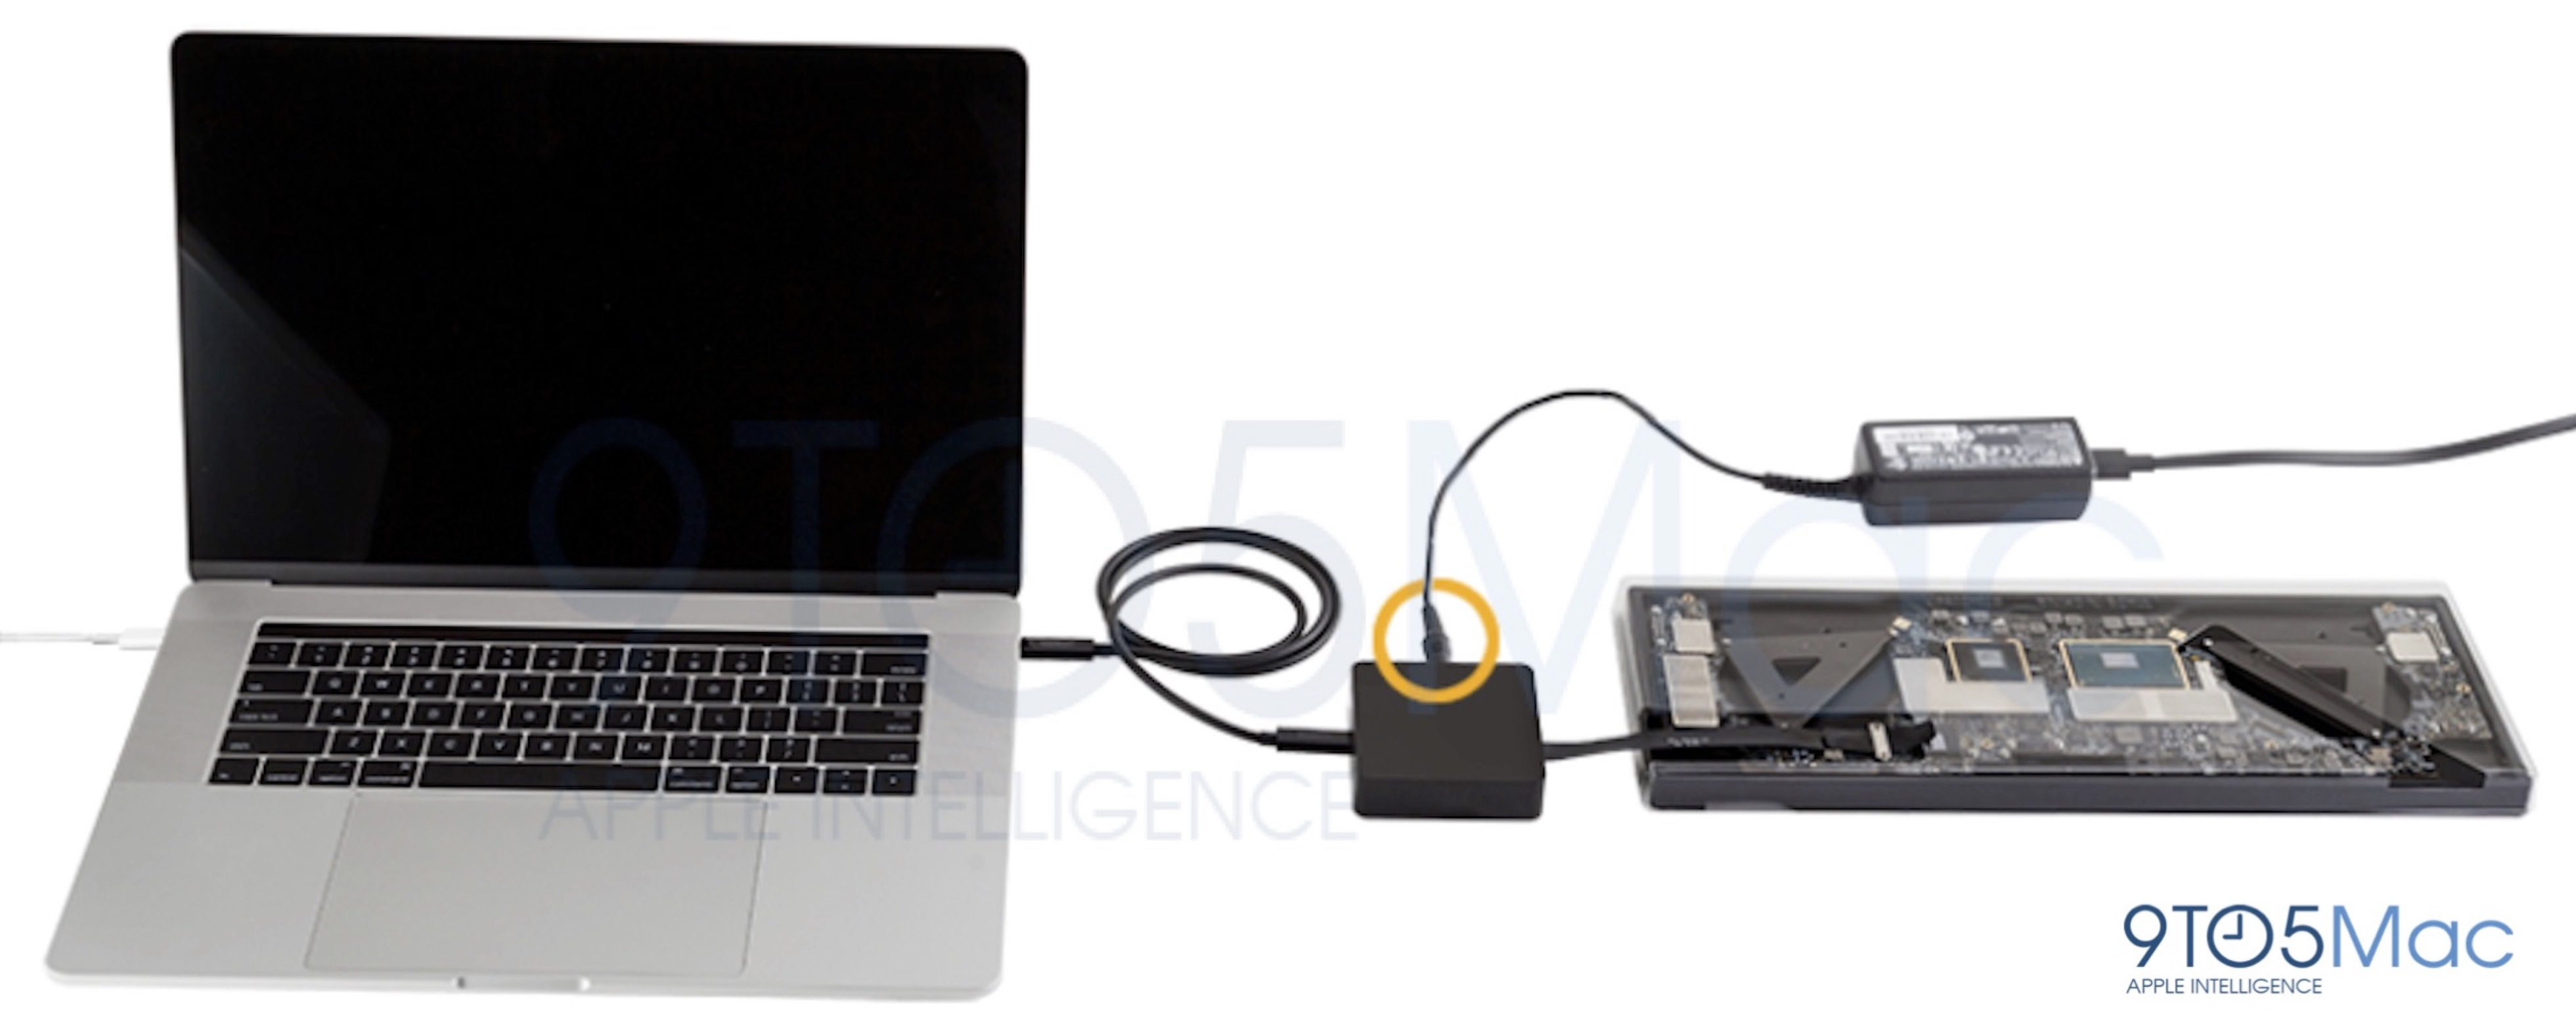 macbook-pro-ssd-rescue-tool-image-001